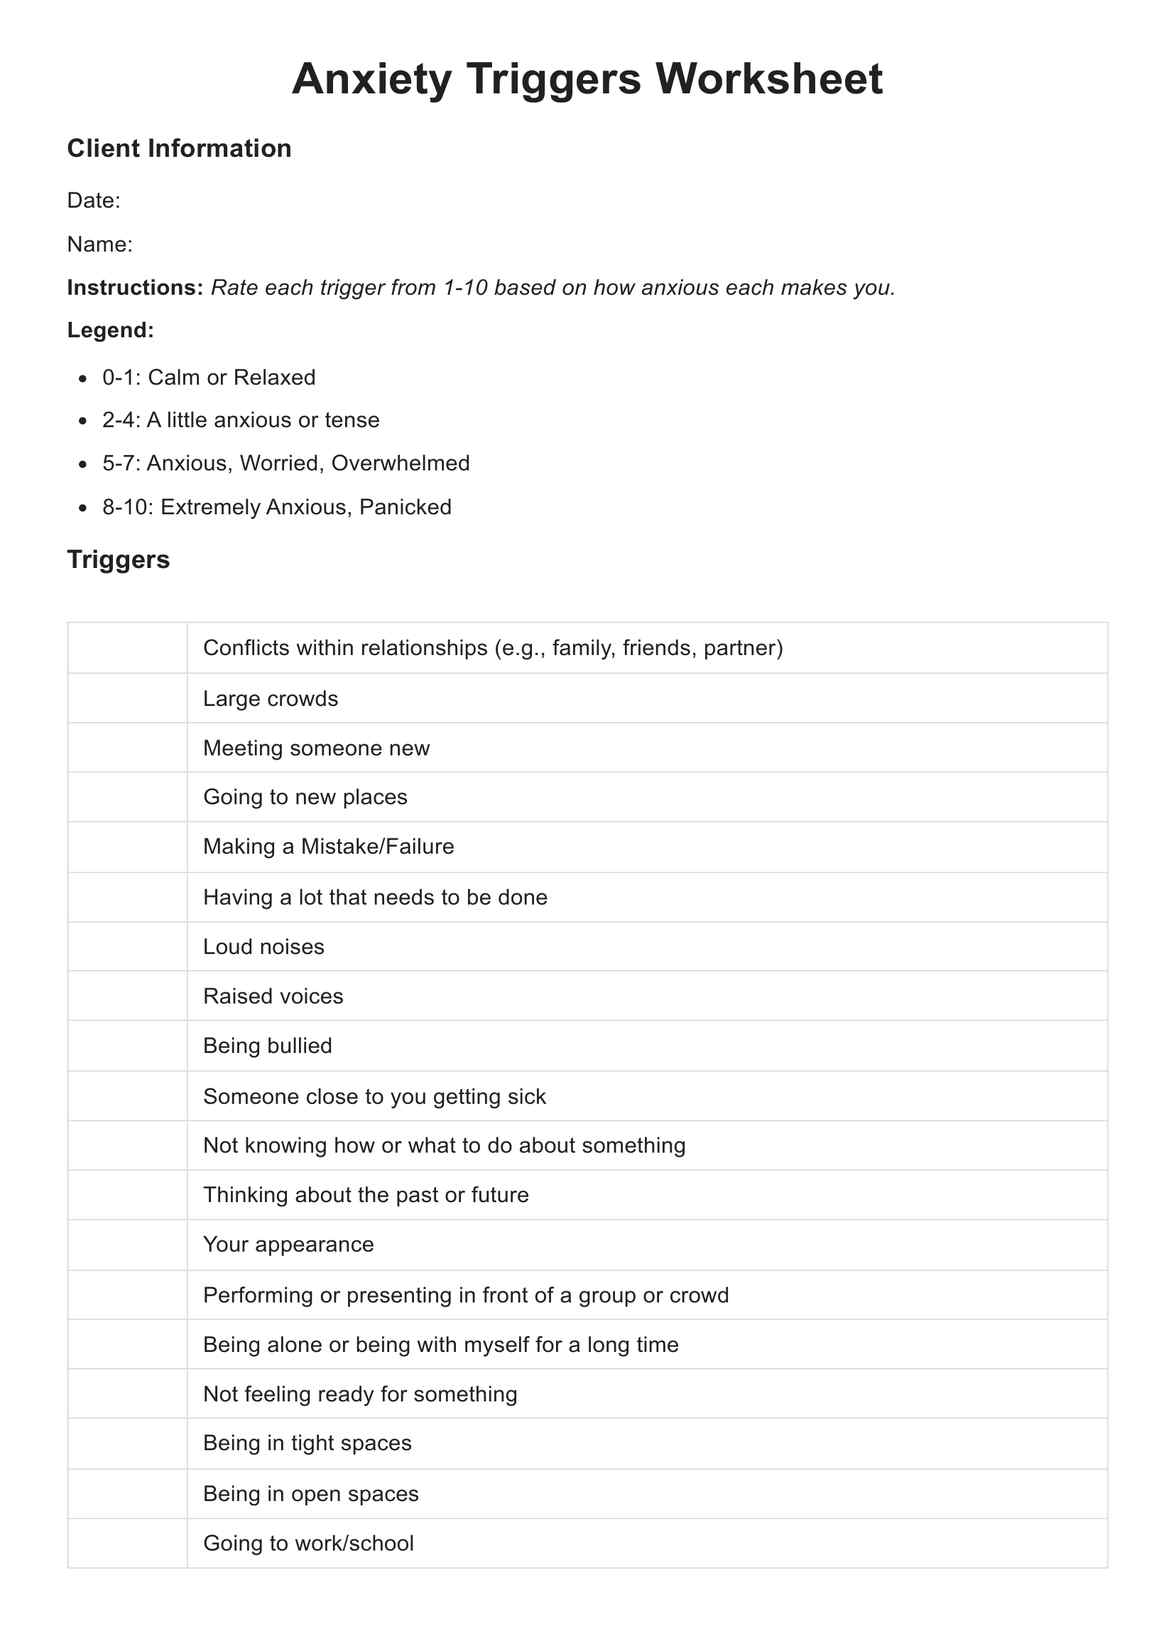 Anxiety Triggers Worksheet PDF Example